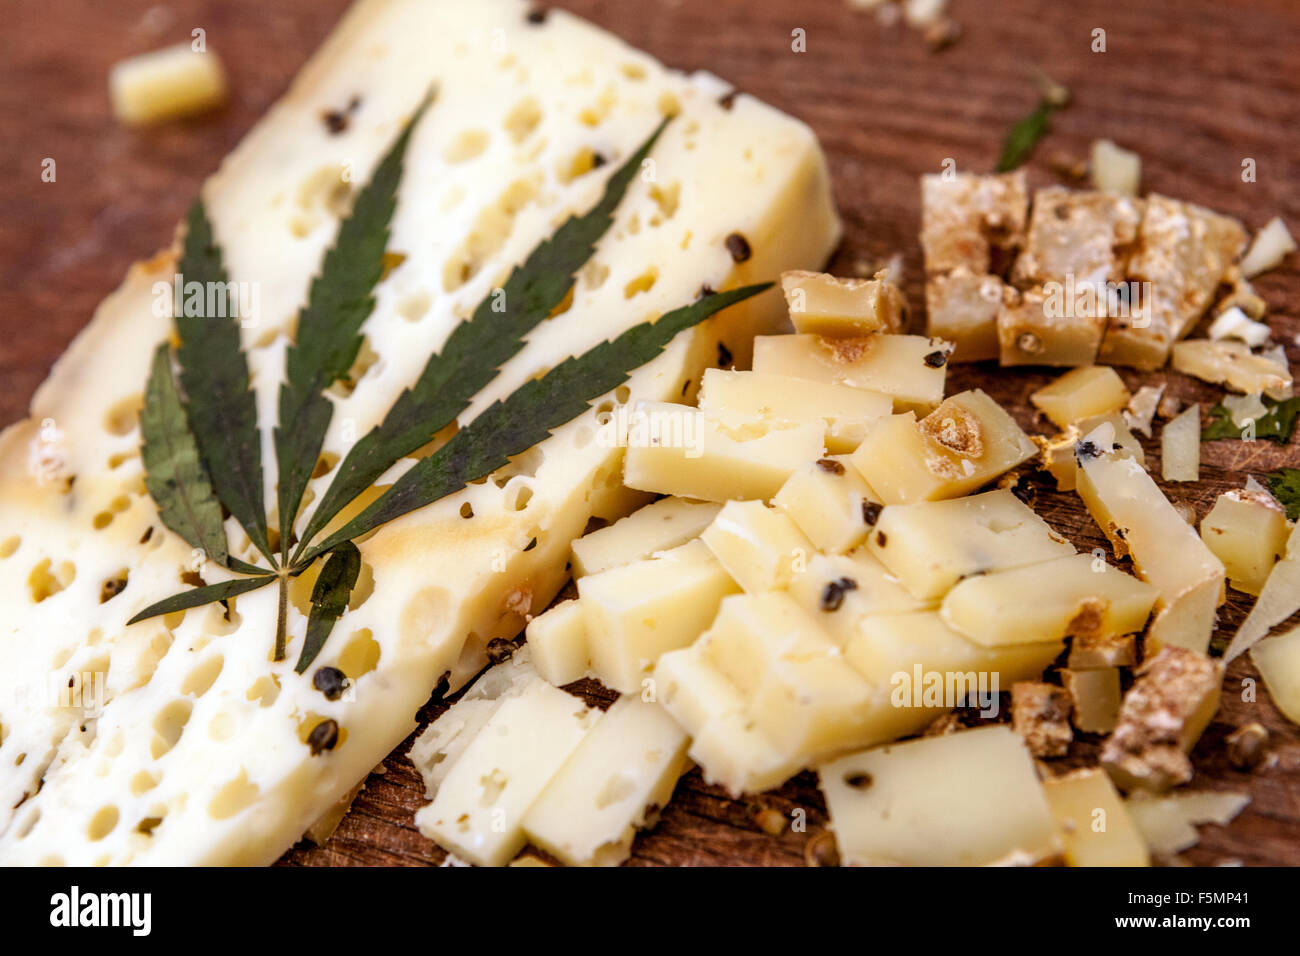 Product of the family farm. Tasting and offering of Sheep's cheese decorated with a cannabis leaf in the Prague Czech Republic Stock Photo